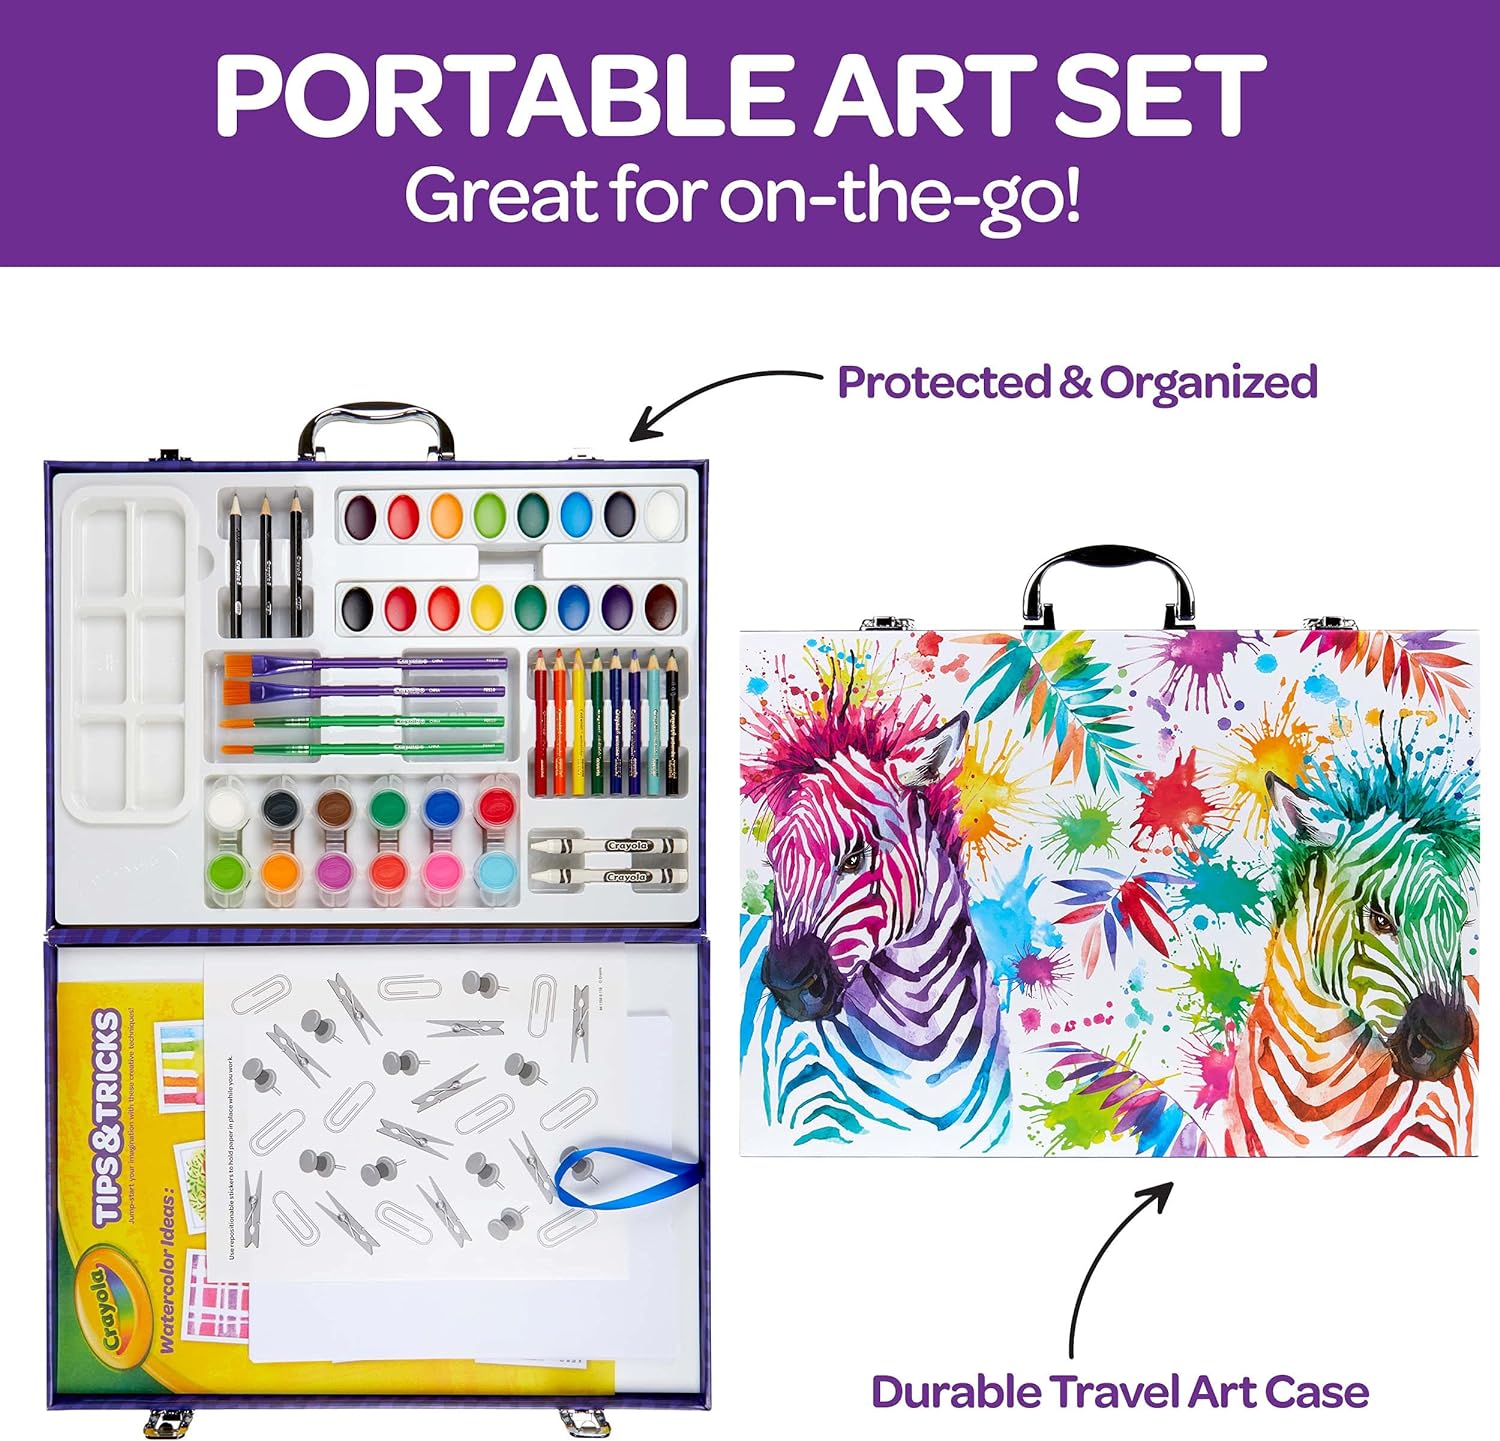 Crayola Table Top Easel & Paint Set